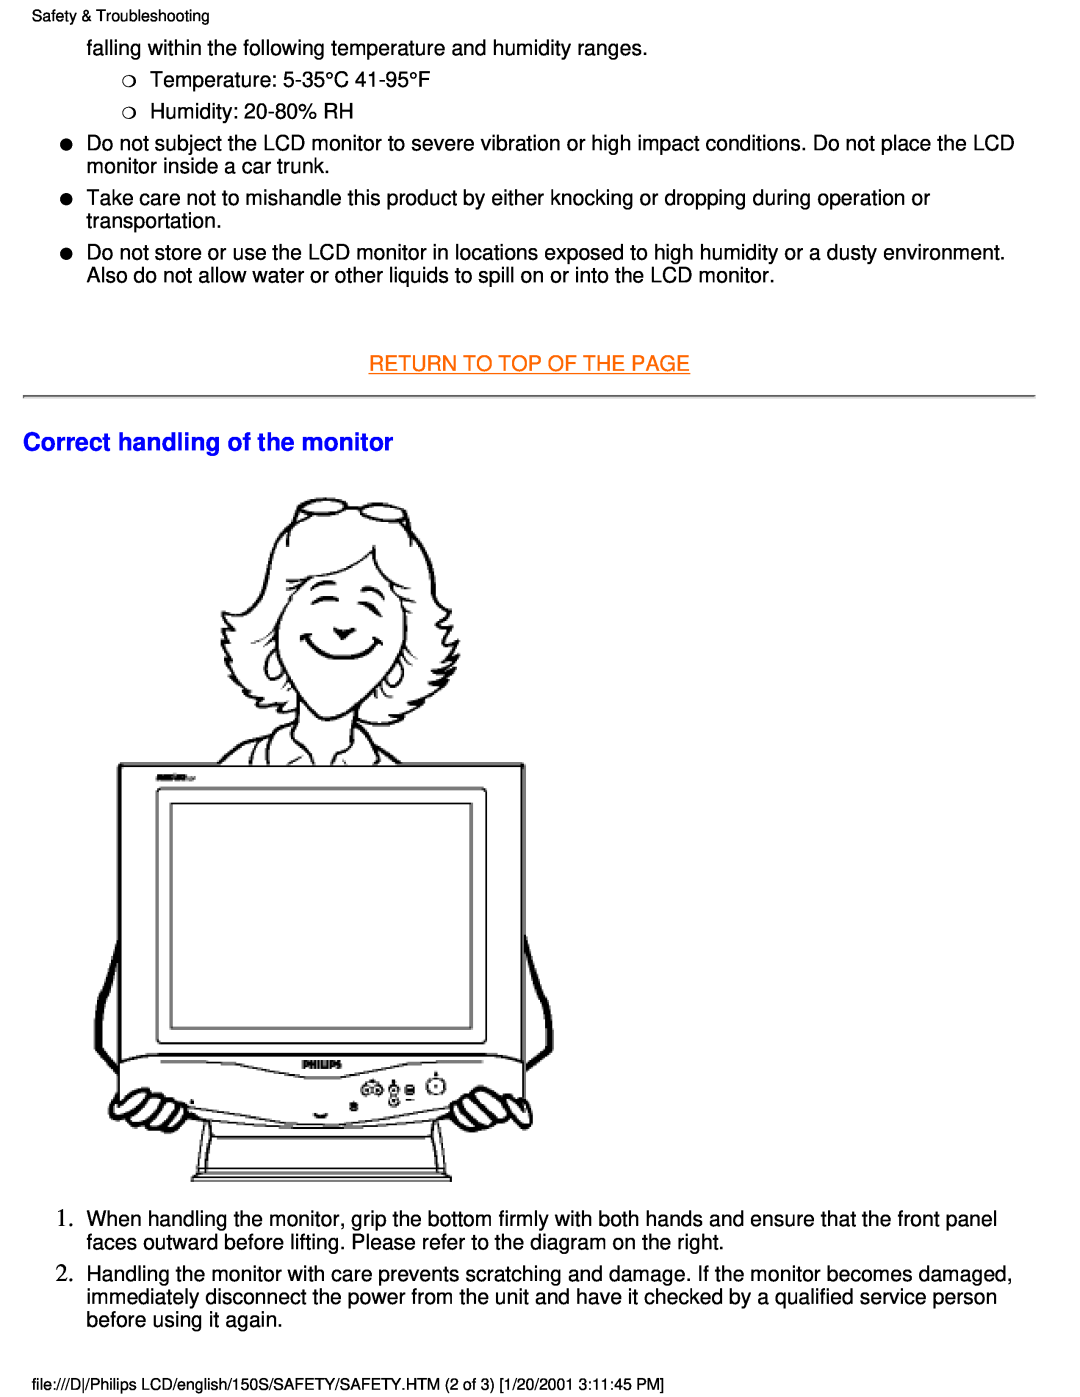 Philips 150S user manual Correct handling of the monitor, Return To Top Of The Page 